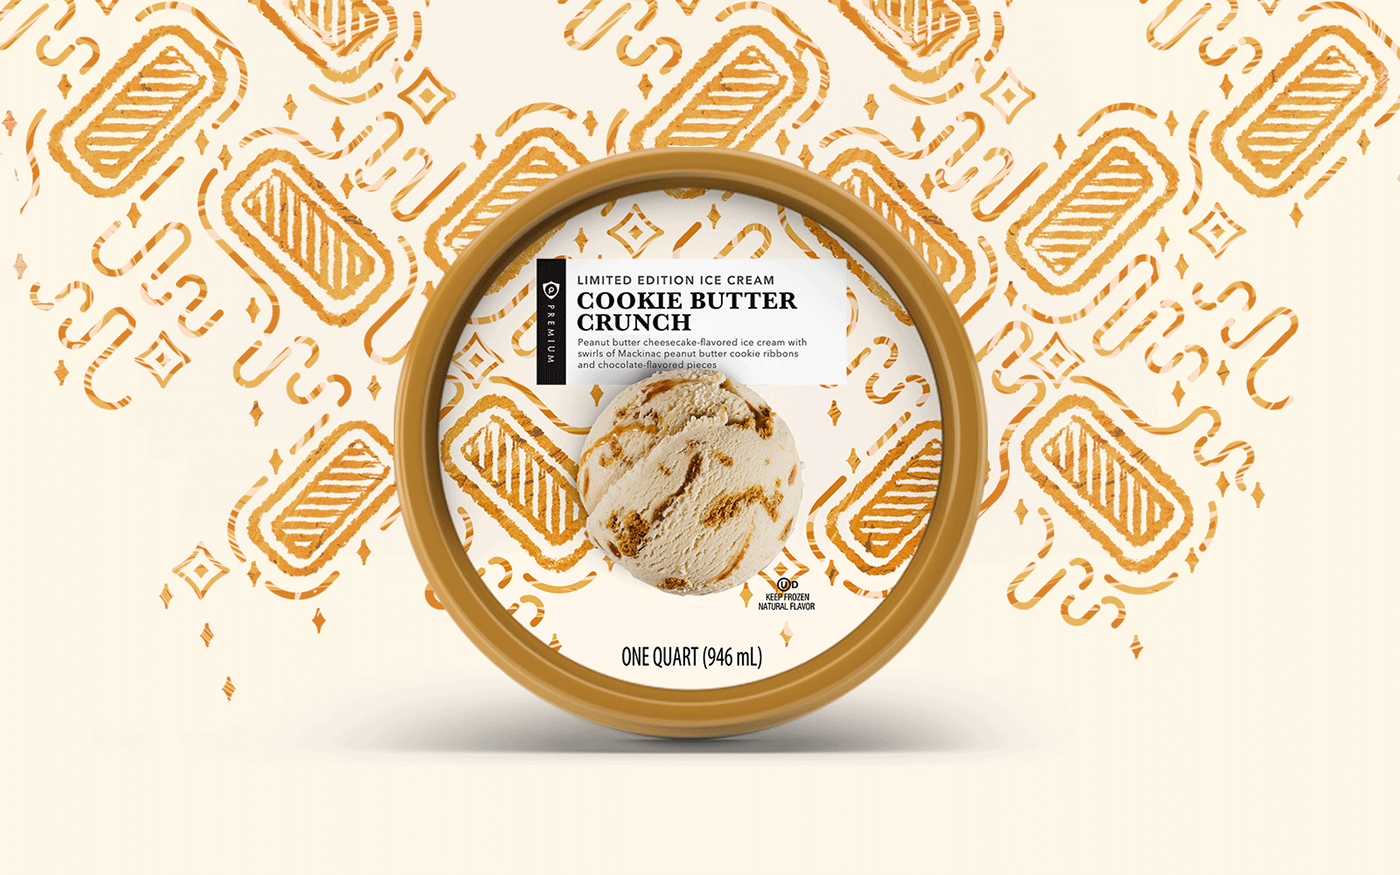 publix ice cream cookie butter crunch caramel swirl pattern geometric cookie speculaas crumbs